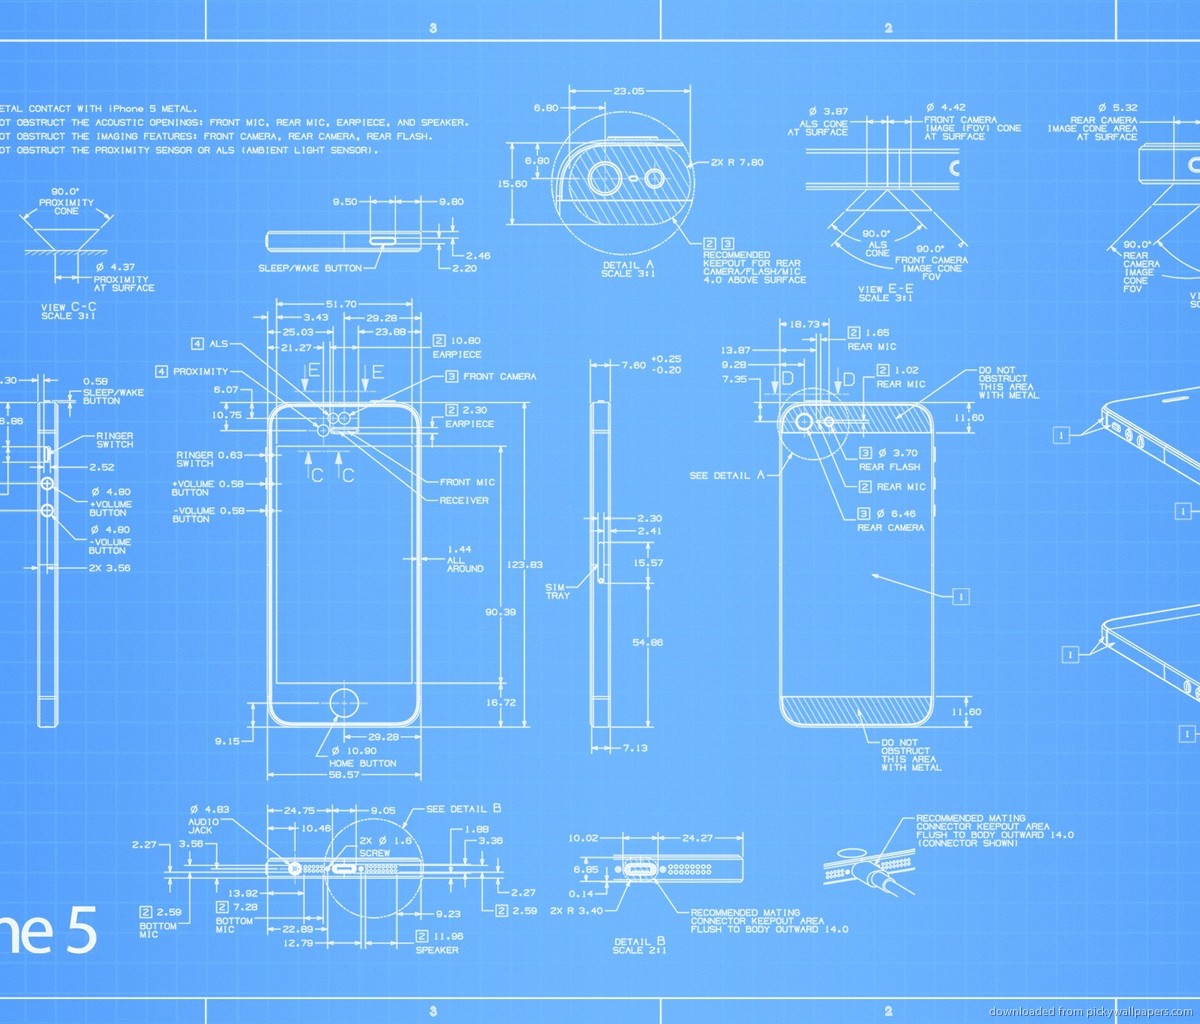 Download Apple iPhone 5 Blueprint Wallpaper For Samsung Galaxy Tab